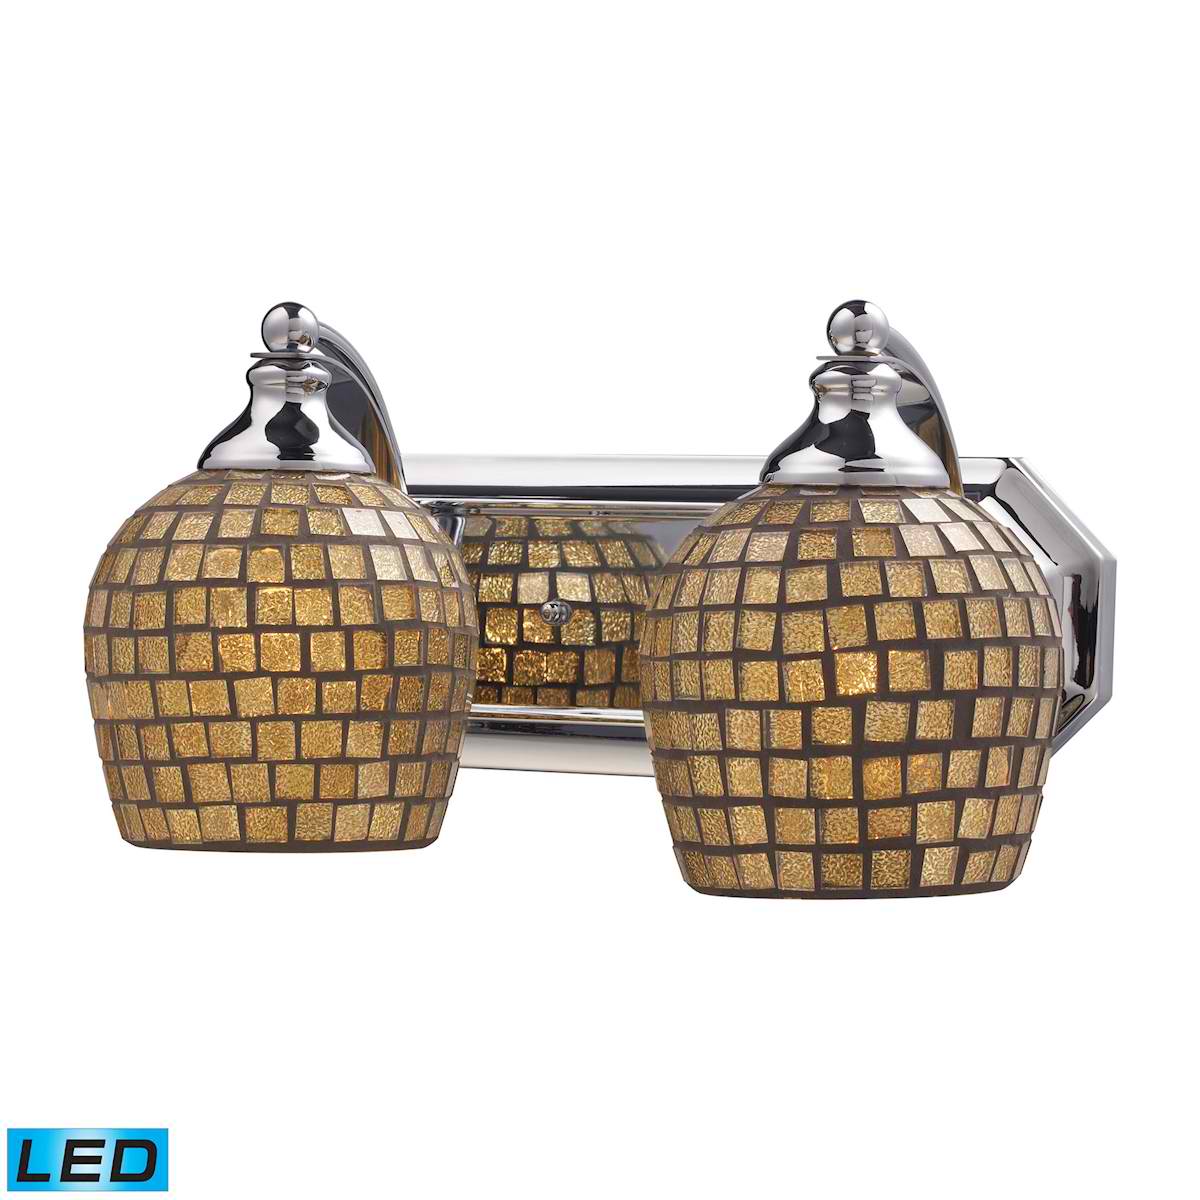 2 Light Vanity in Polished Chrome and Gold Mosaic Glass - LED, 800 Lumens (1600 Lumens Total) with Full Scale